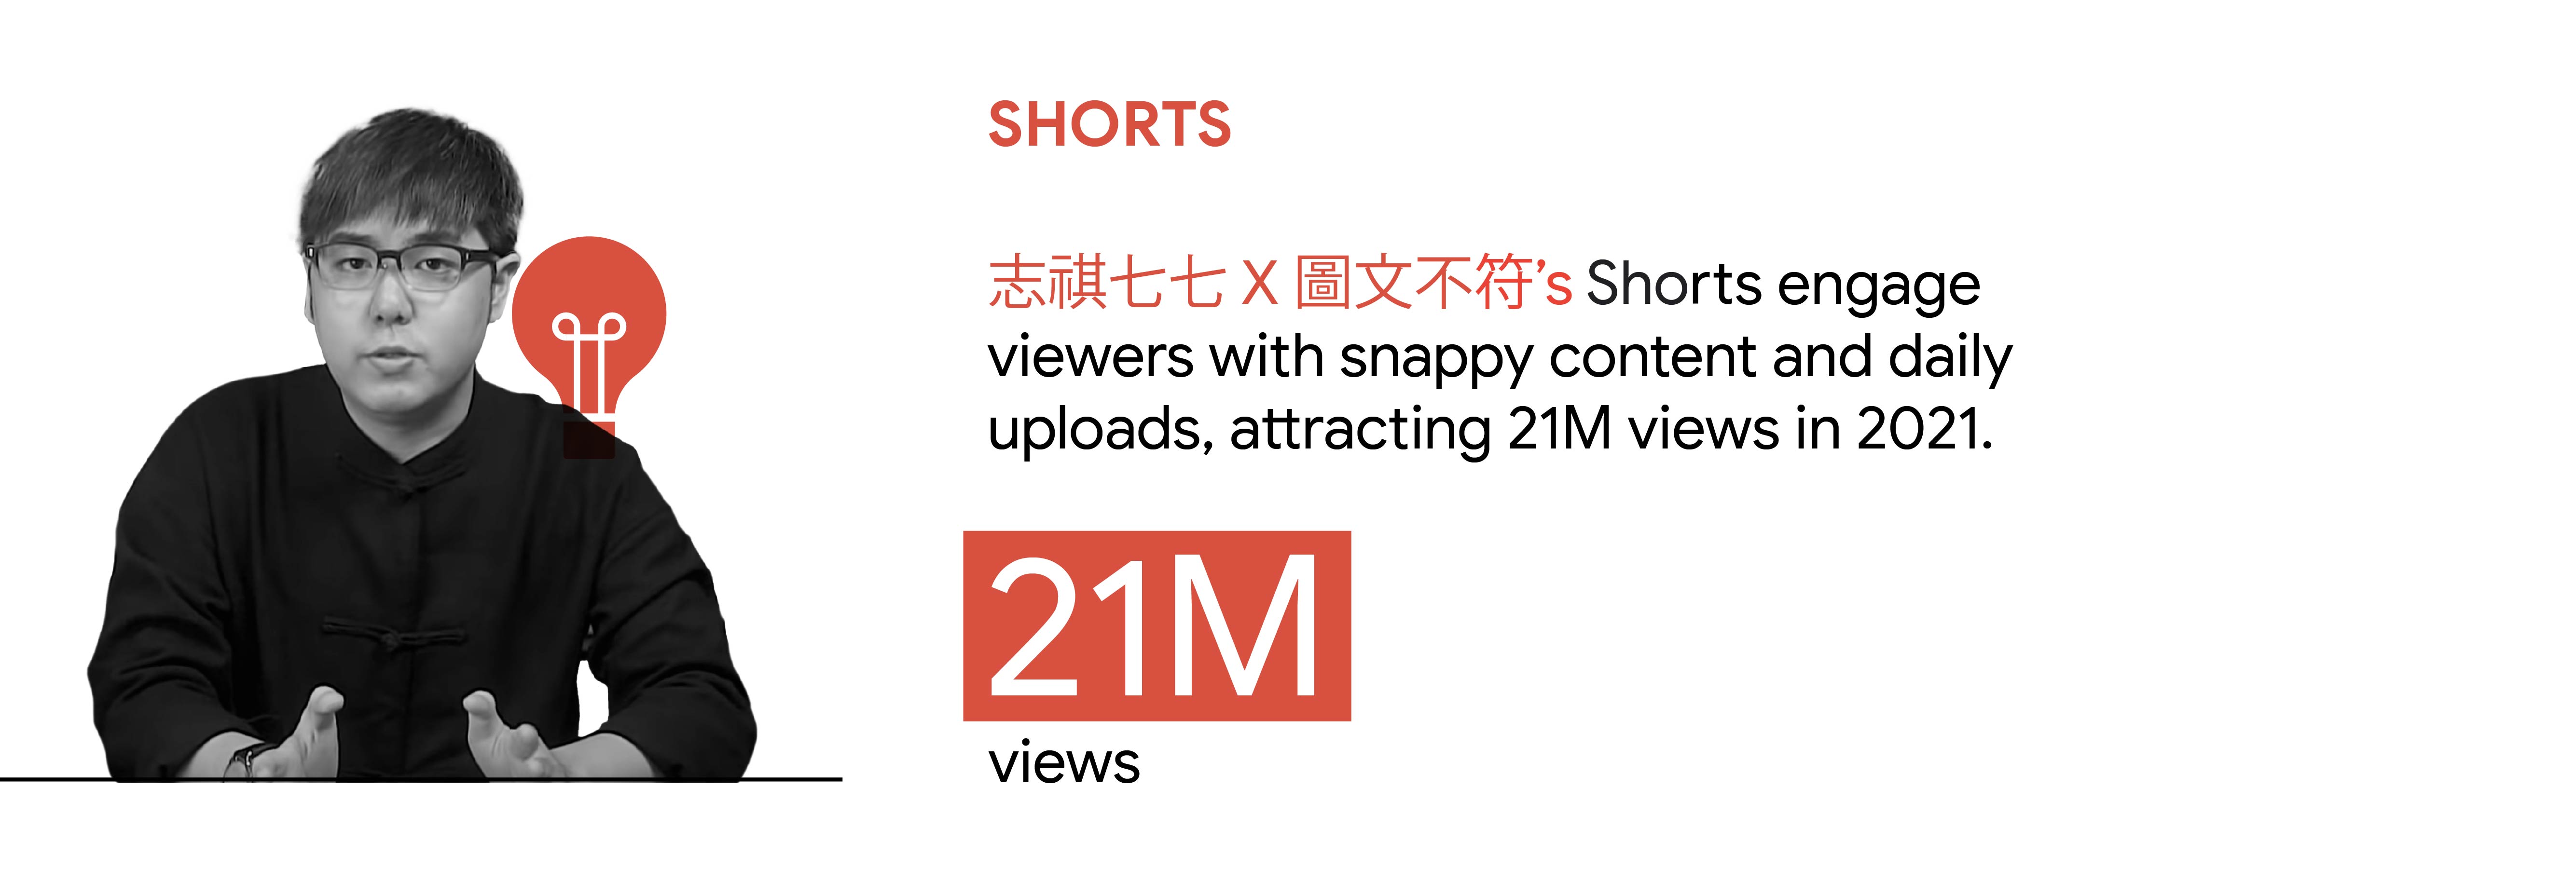 YouTube trend 5: Shorts. In Taiwan, 志祺七七X 圖文不符’s Shorts engage viewers with snappy content and daily uploads, attracting 21M views in 2021.